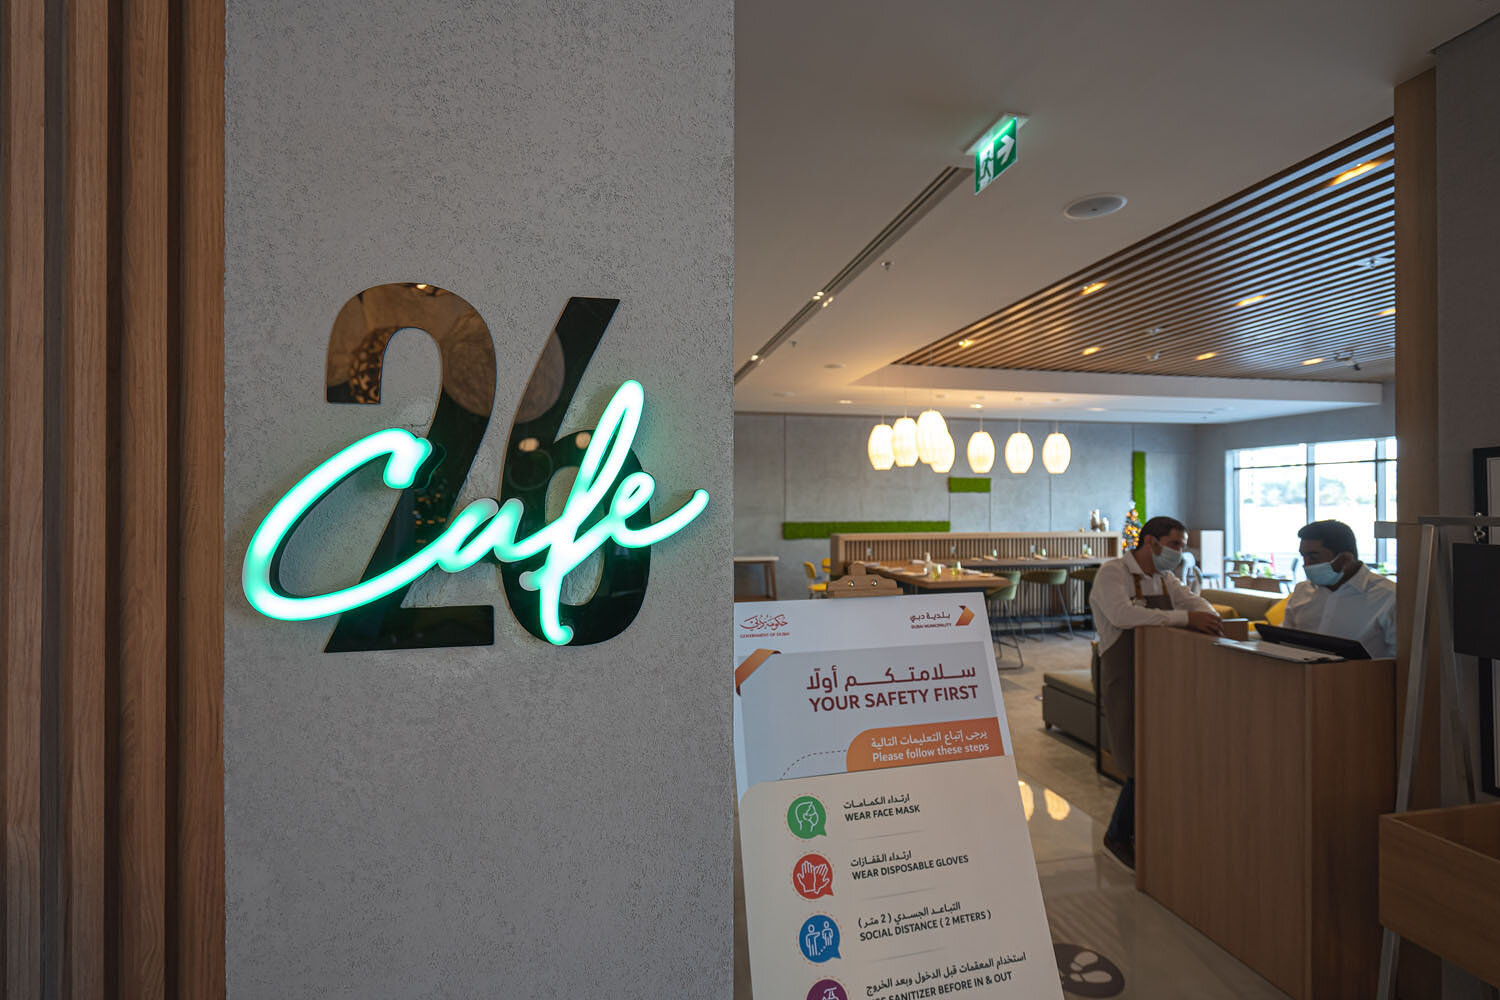  Entrance to Cafe 26 